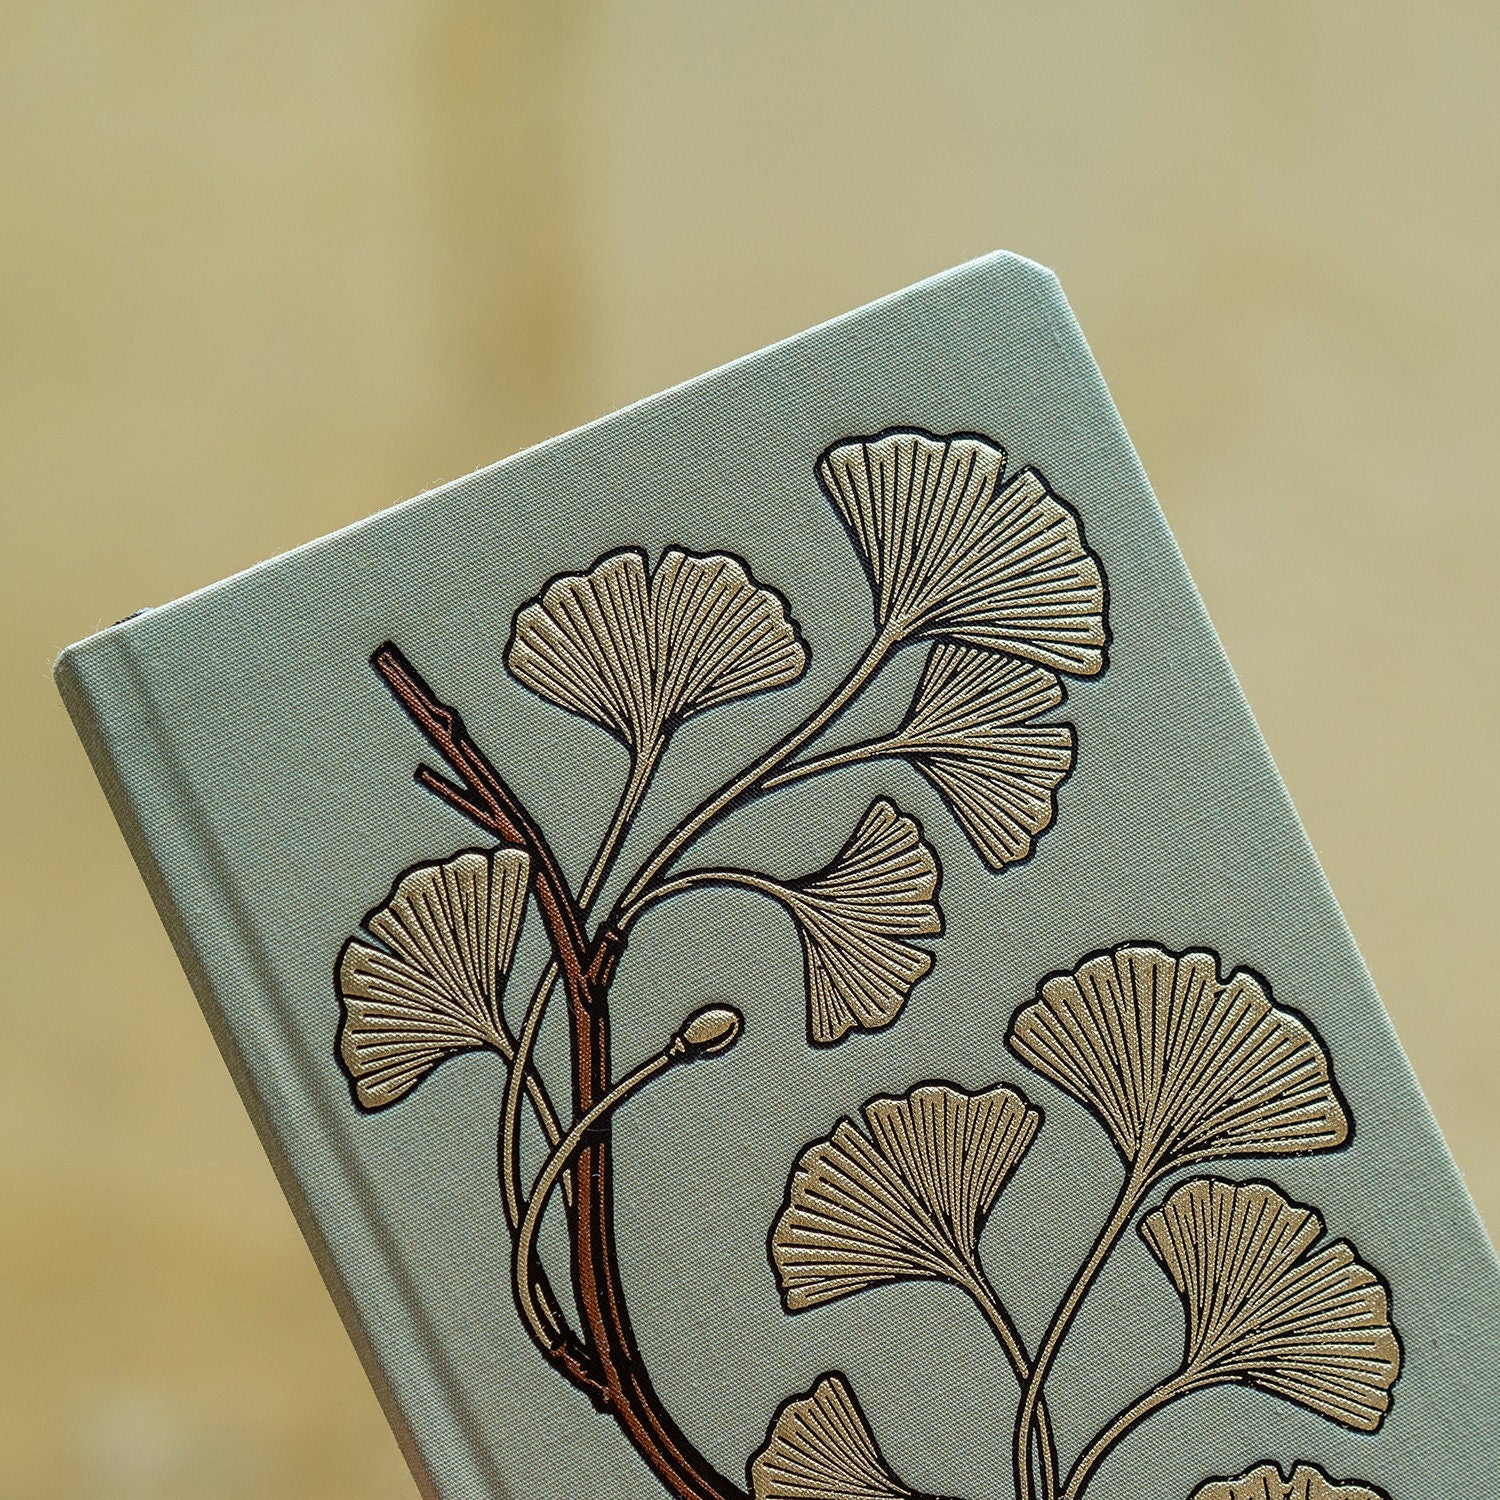 Mini Self-filling Planner with Bronzing Ginkgo Vantage Portable Journal Autumn Trilogy Notebook Acid-free Writing Paper 160P Gift for Her